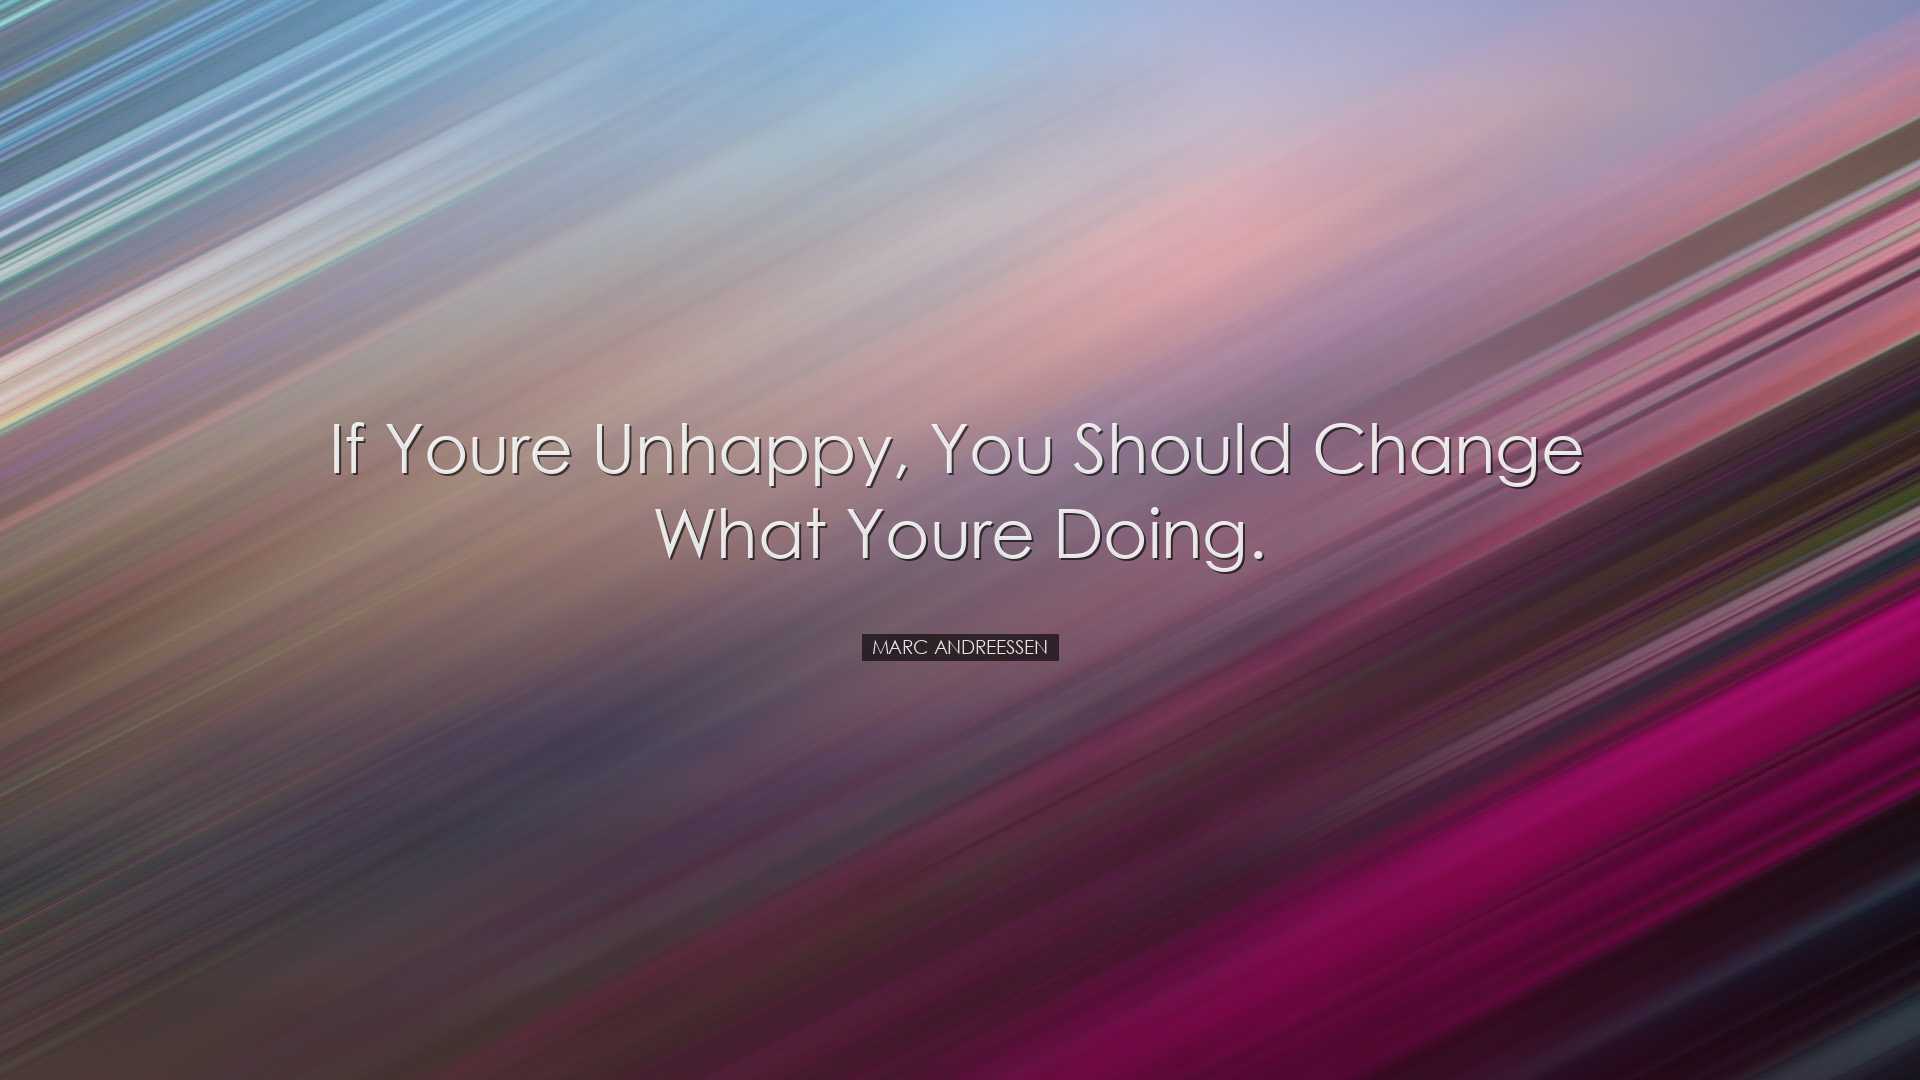 If youre unhappy, you should change what youre doing. - Marc Andre